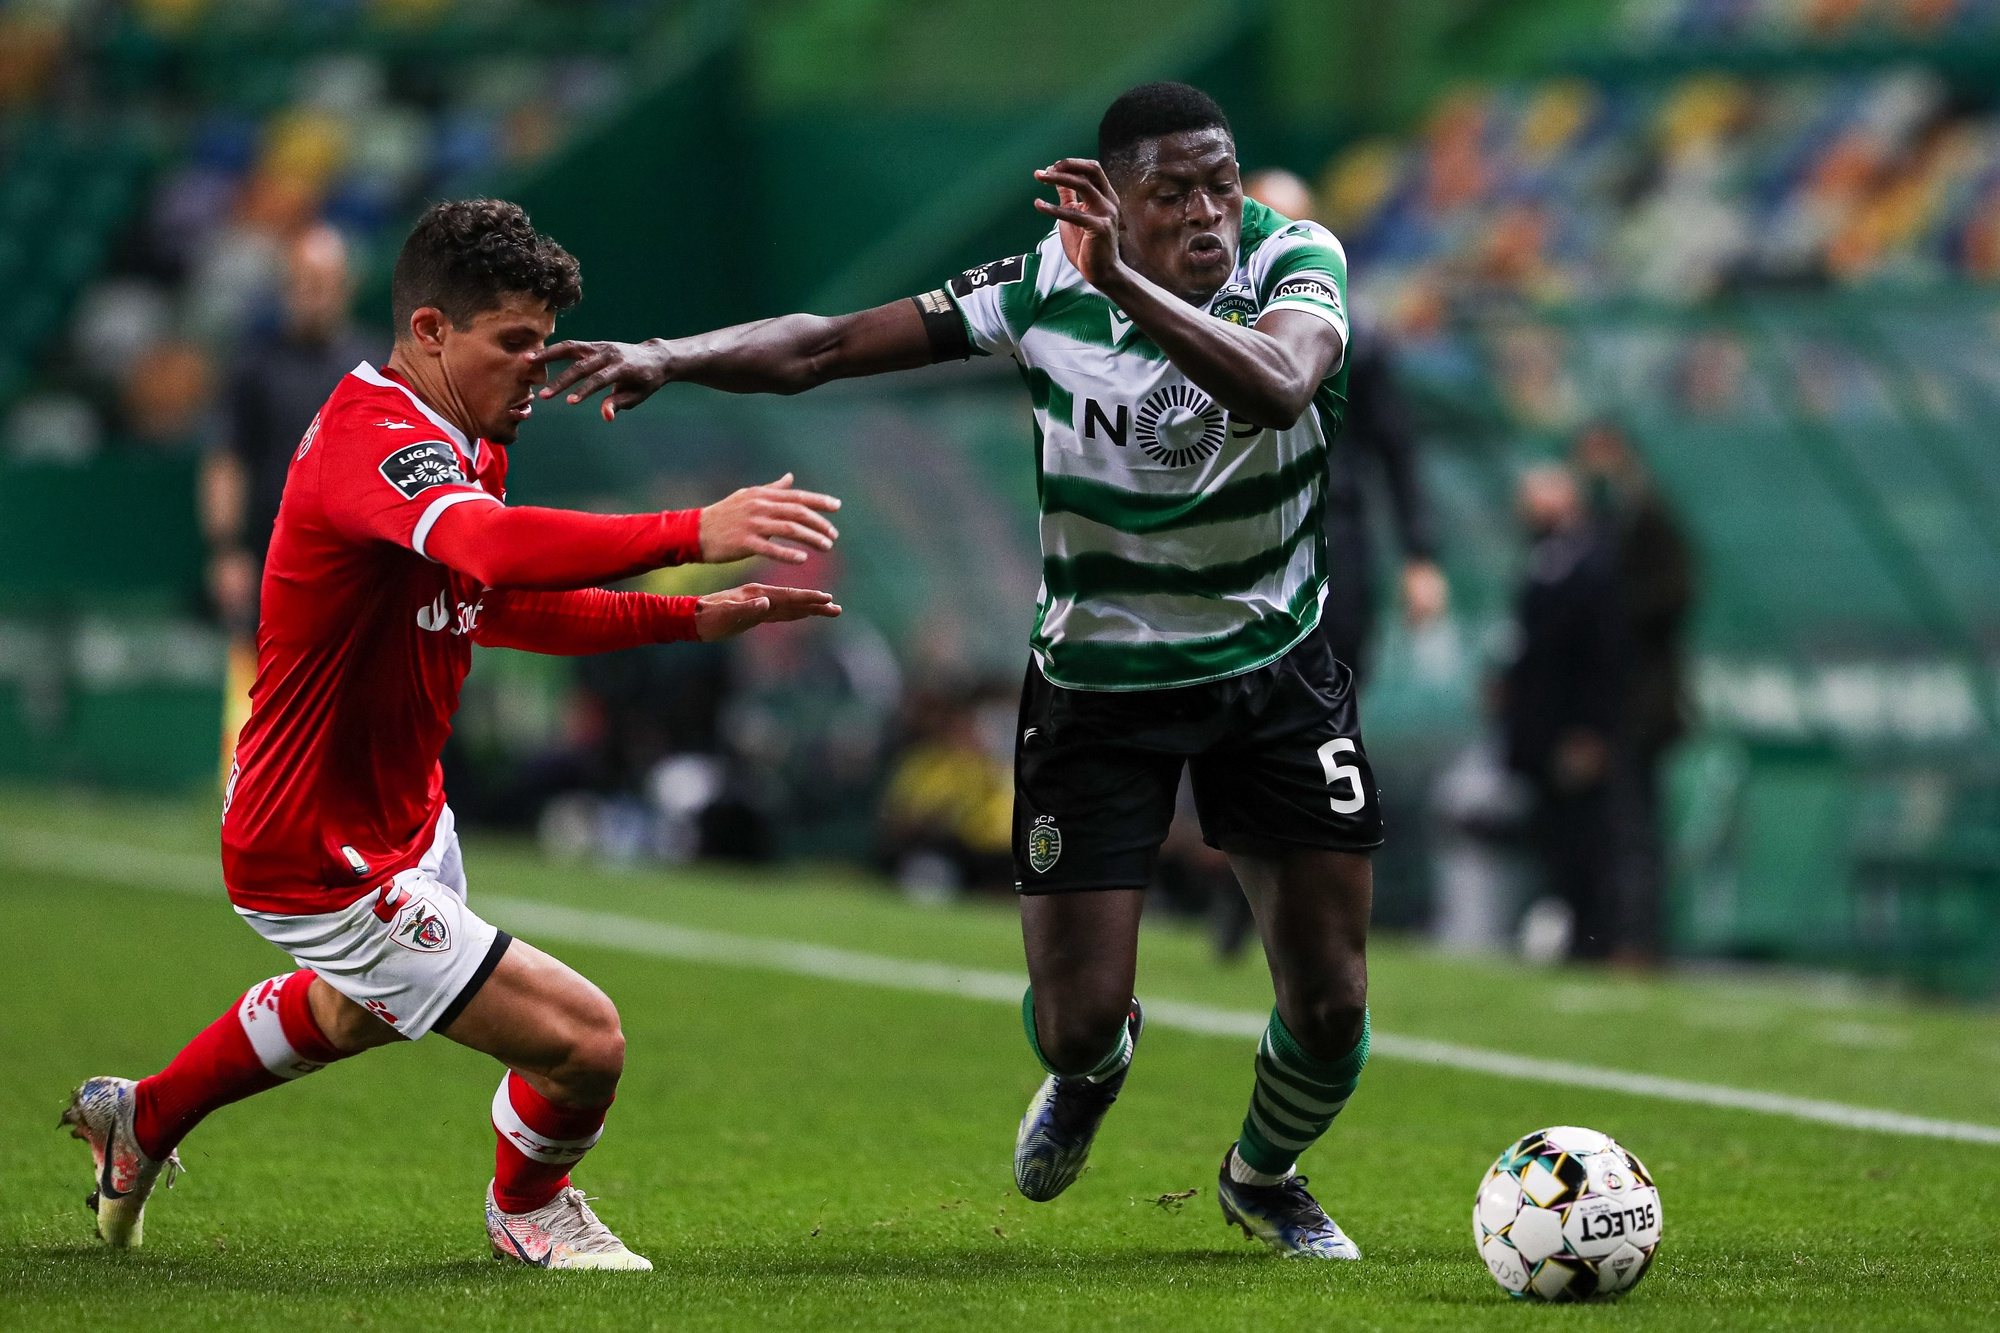 Sporting player Nuno Mendes (R) vies for the ball with Santa Clara player Ramos during their First League Soccer match held at Alvalade Stadium, in Lisbon, Portugal, 05 March 2021. JOSE SENA GOULAO/LUSA